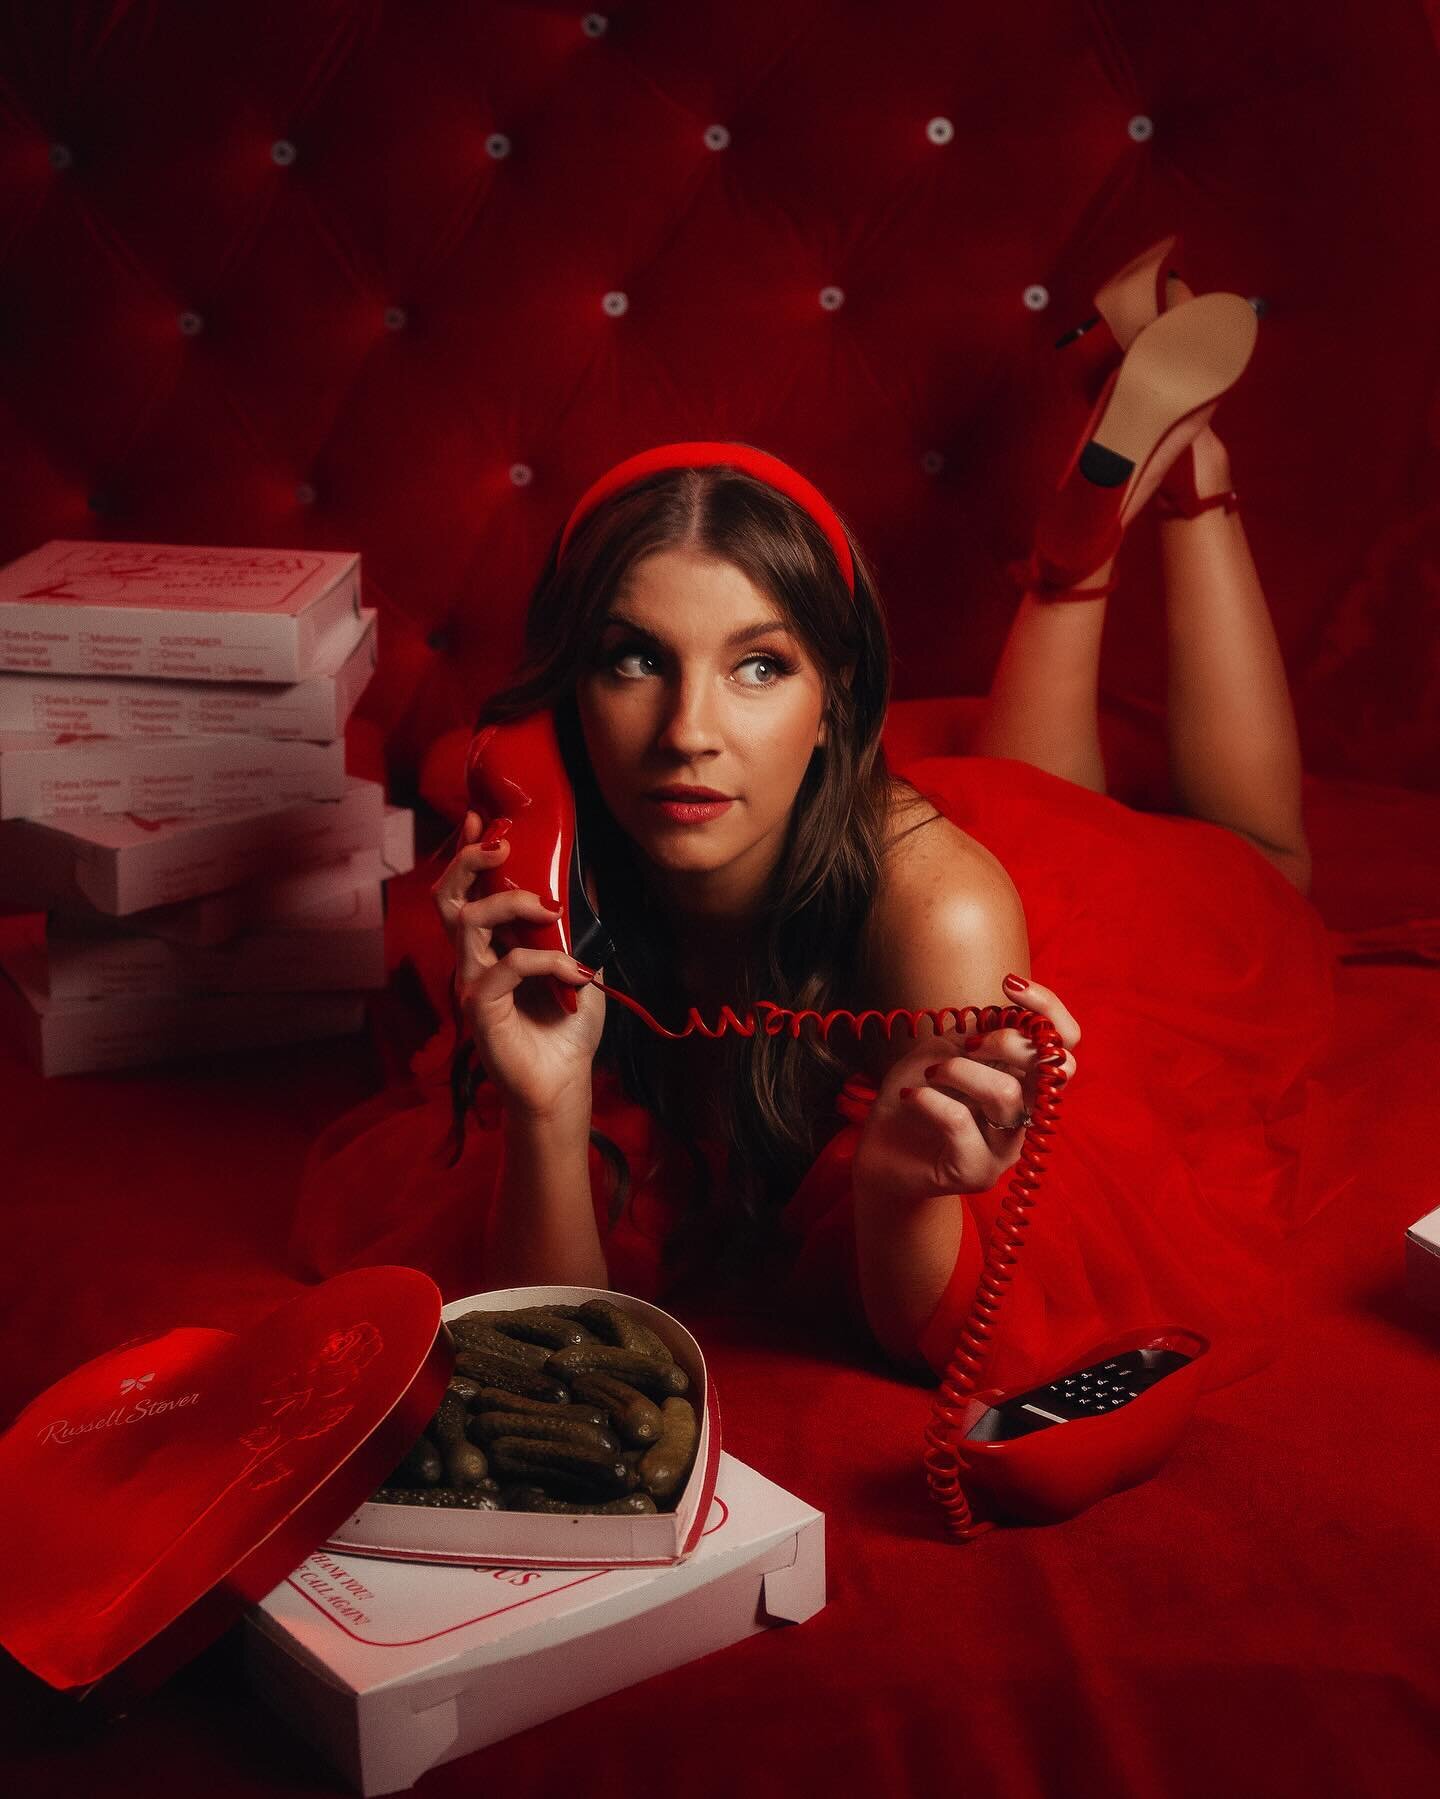 Eat your heart out 🍕&hearts;️
@cheeseywhiskers in the dreamiest red photoshoot 🍒
friendly reminder to book your valentines sessions asap (I dare you) 🫶🏼
.
.
.
.
.
.
.
#valentinesphotoshoot #instagramreels #portraitgames #bravoportraits #igreels #